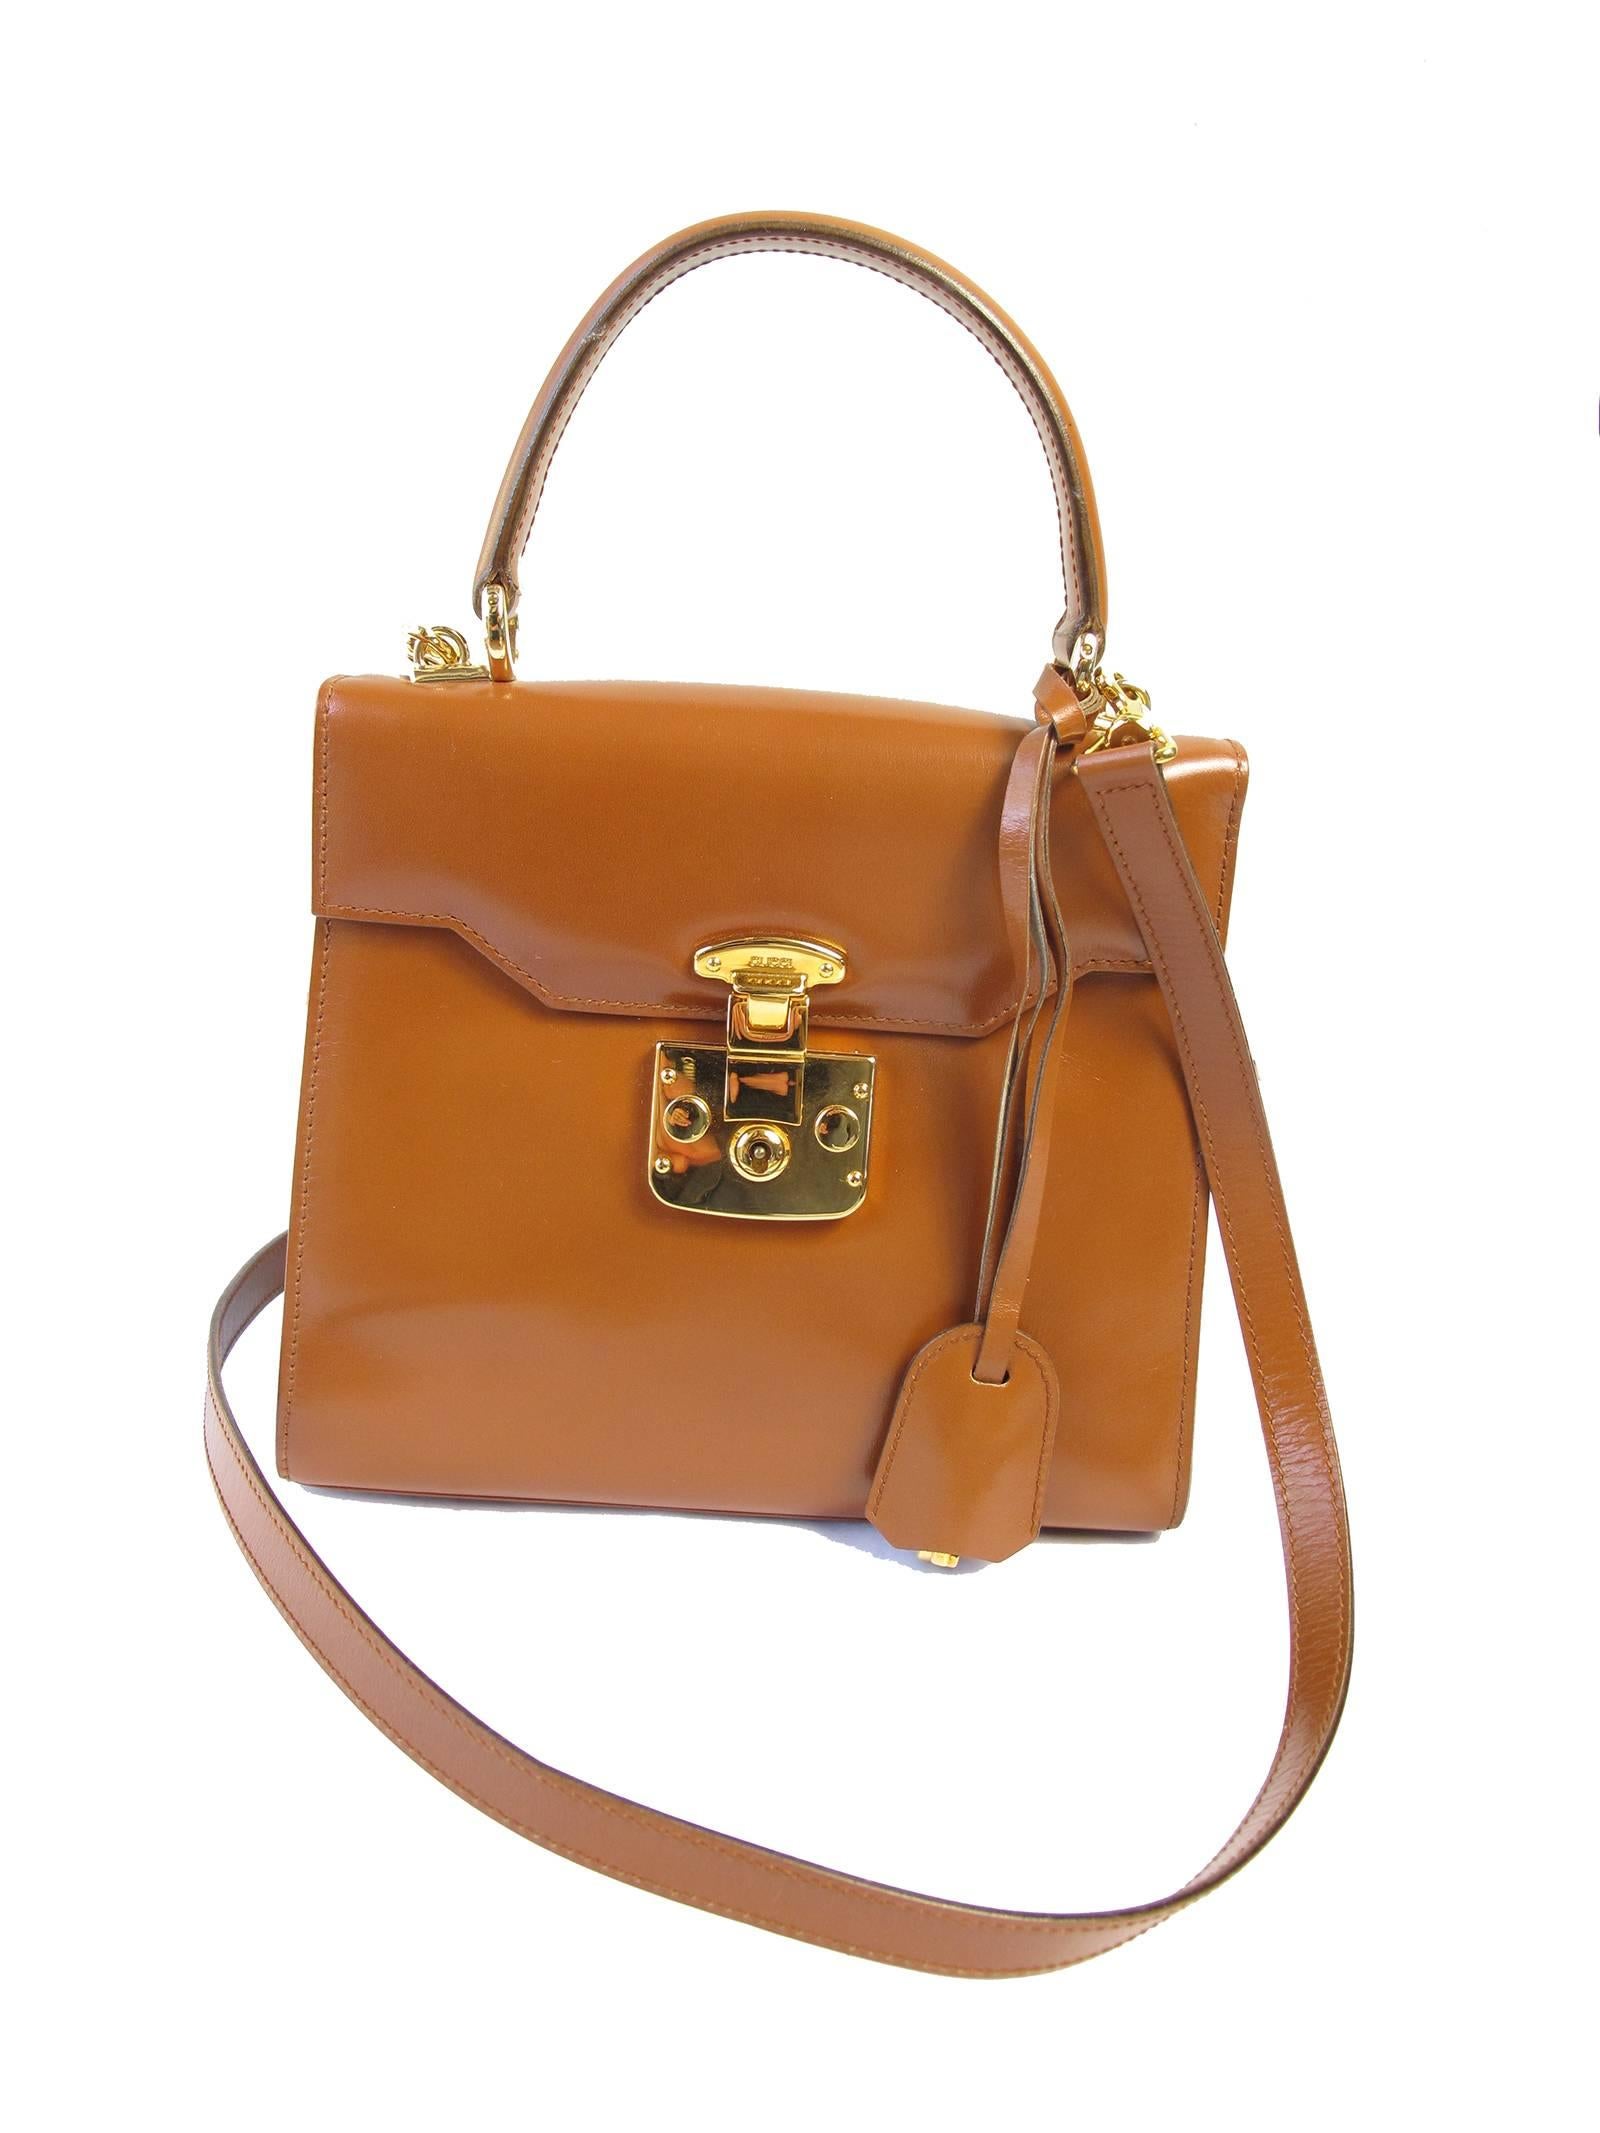 Orange Gucci Top Handle Caramel Leather Bag with Strap